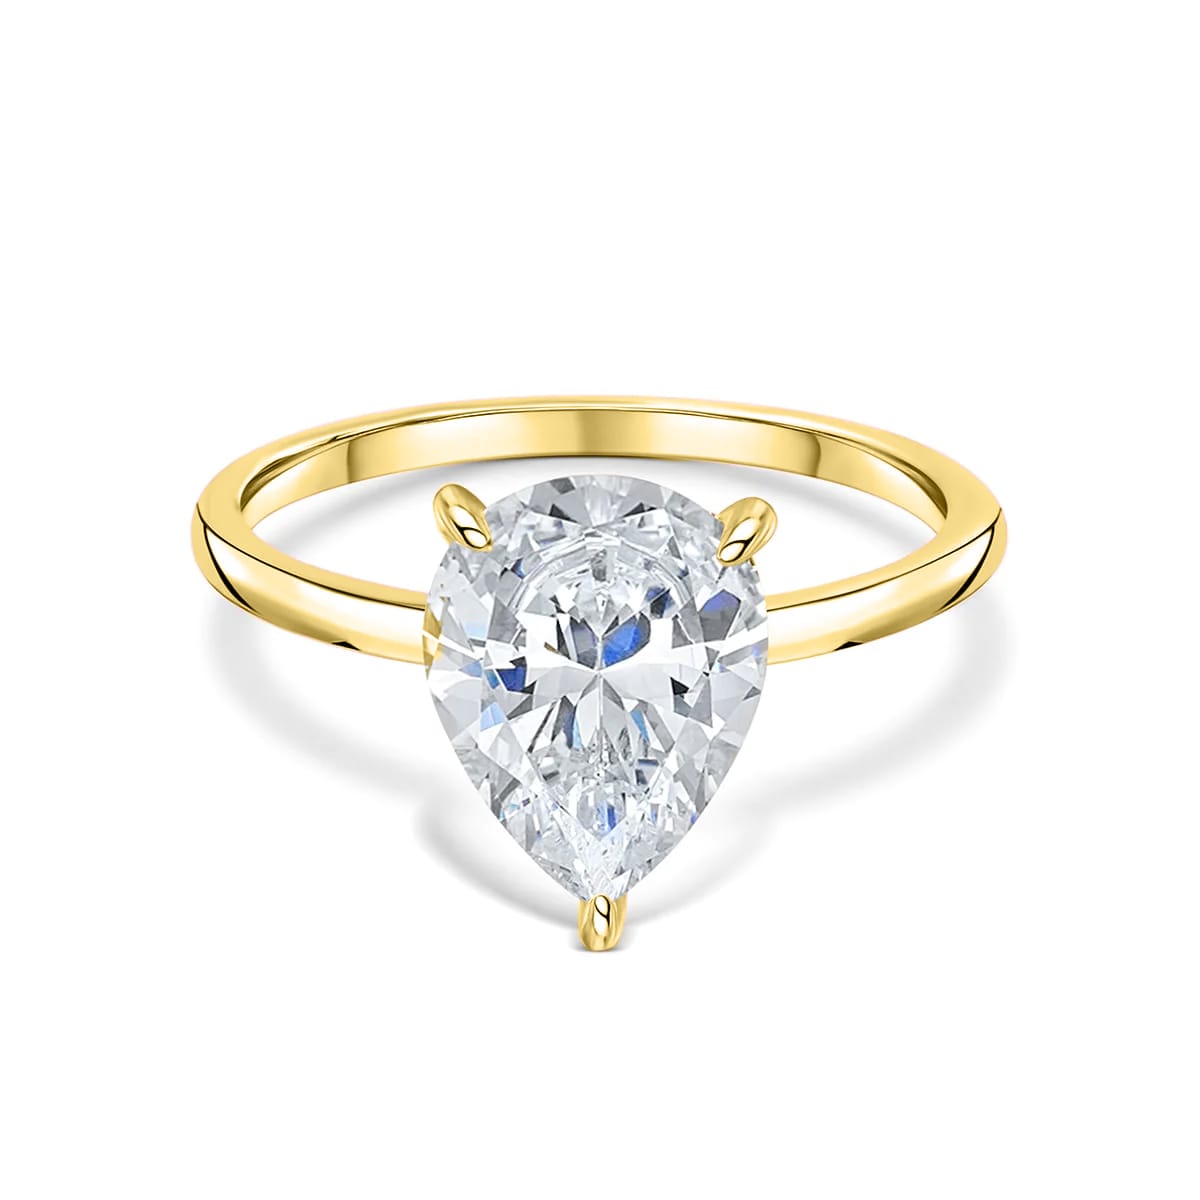 Yellow gold pear cut engagement ring with hidden halo.